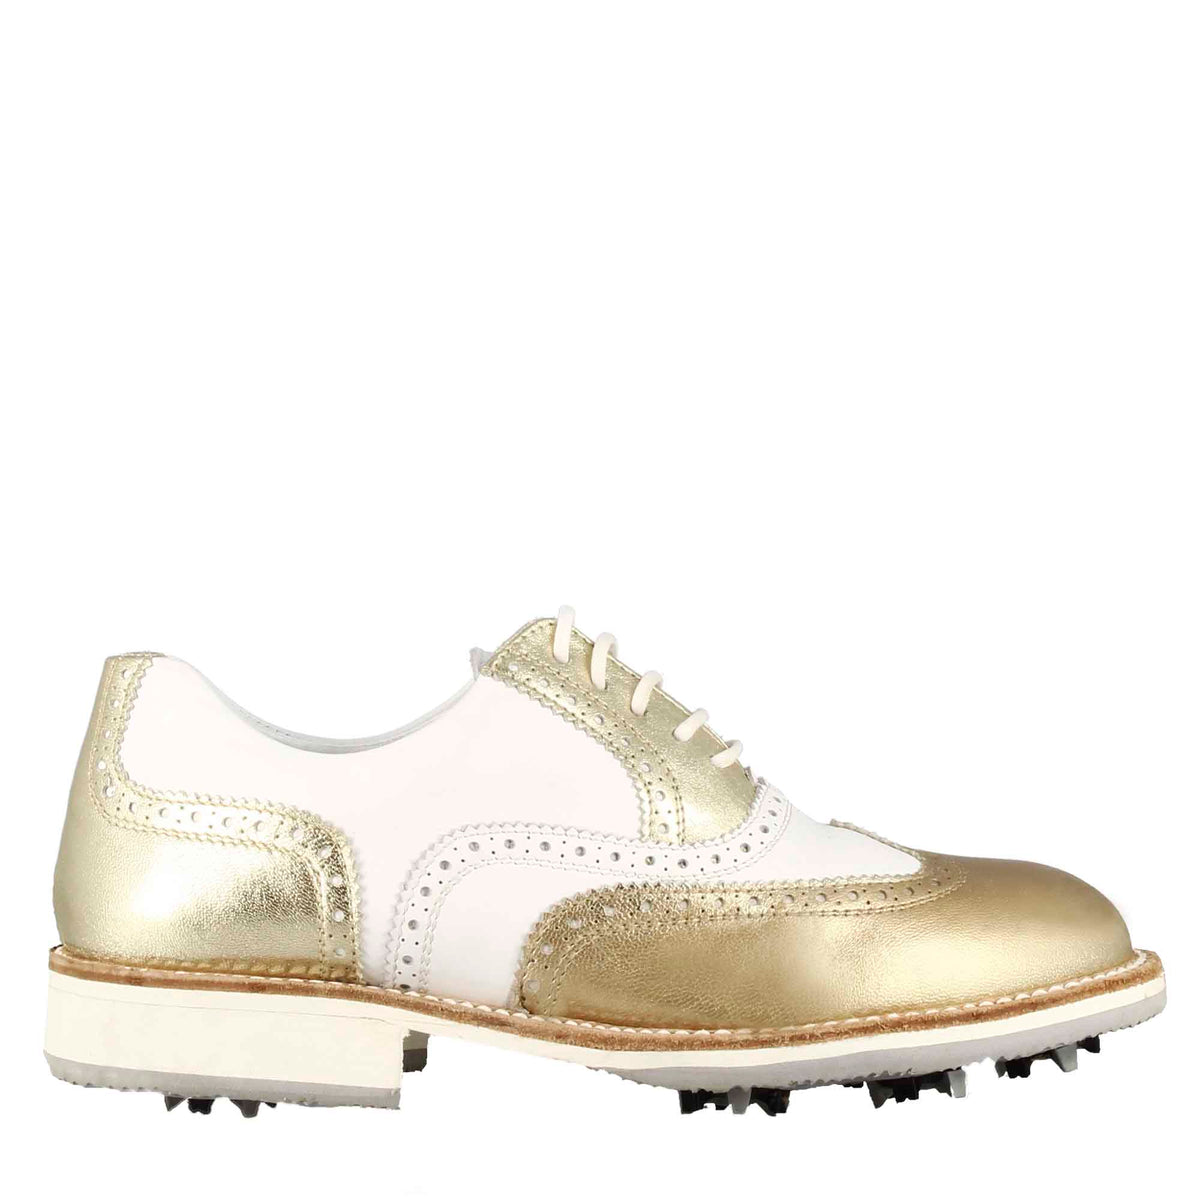 Handcrafted women's golf shoes in white leather with gold-colored details